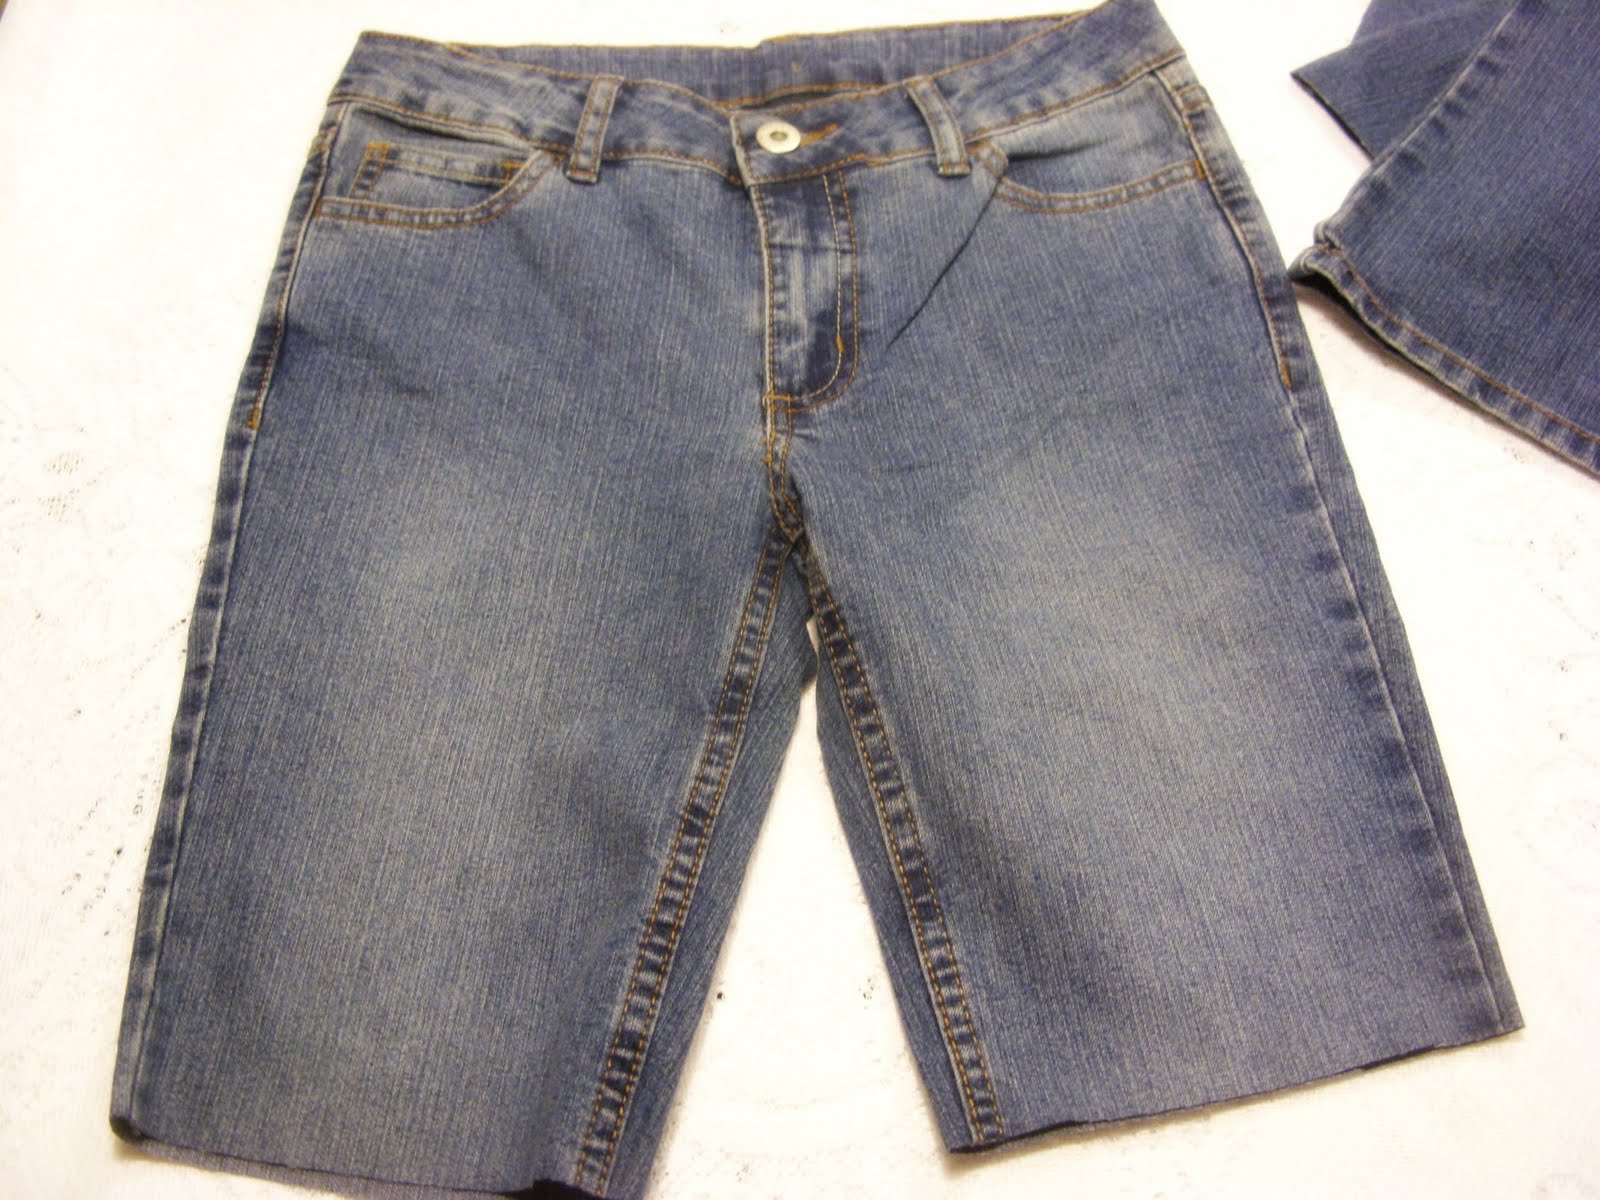 RoCa and Company: Simple JeansTurned Shorts Refashion